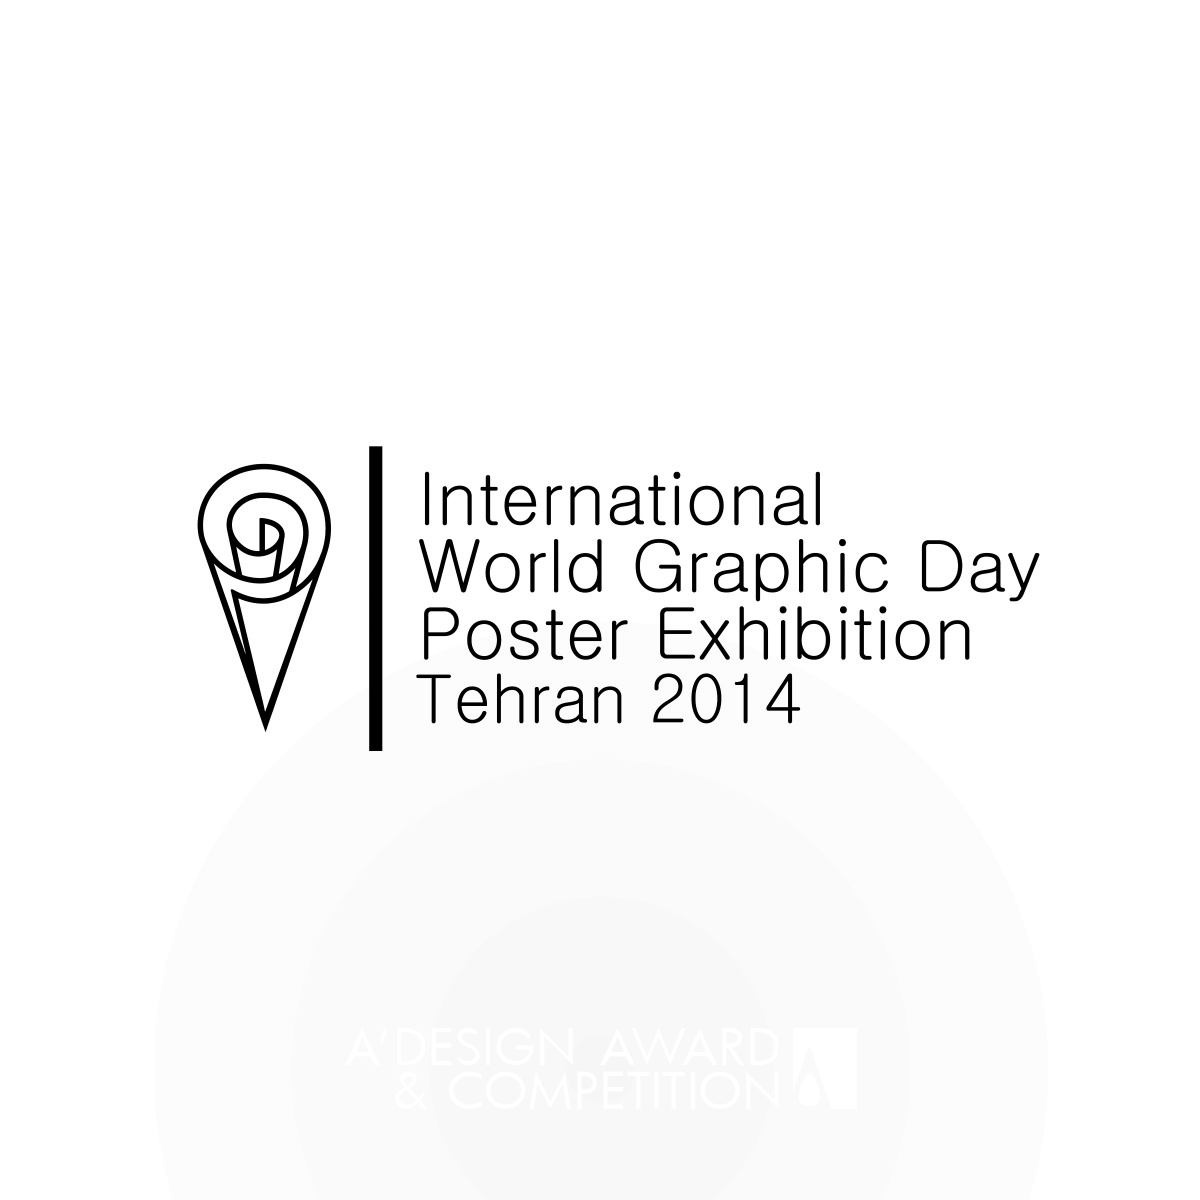 World Graphic Day poster exhibition